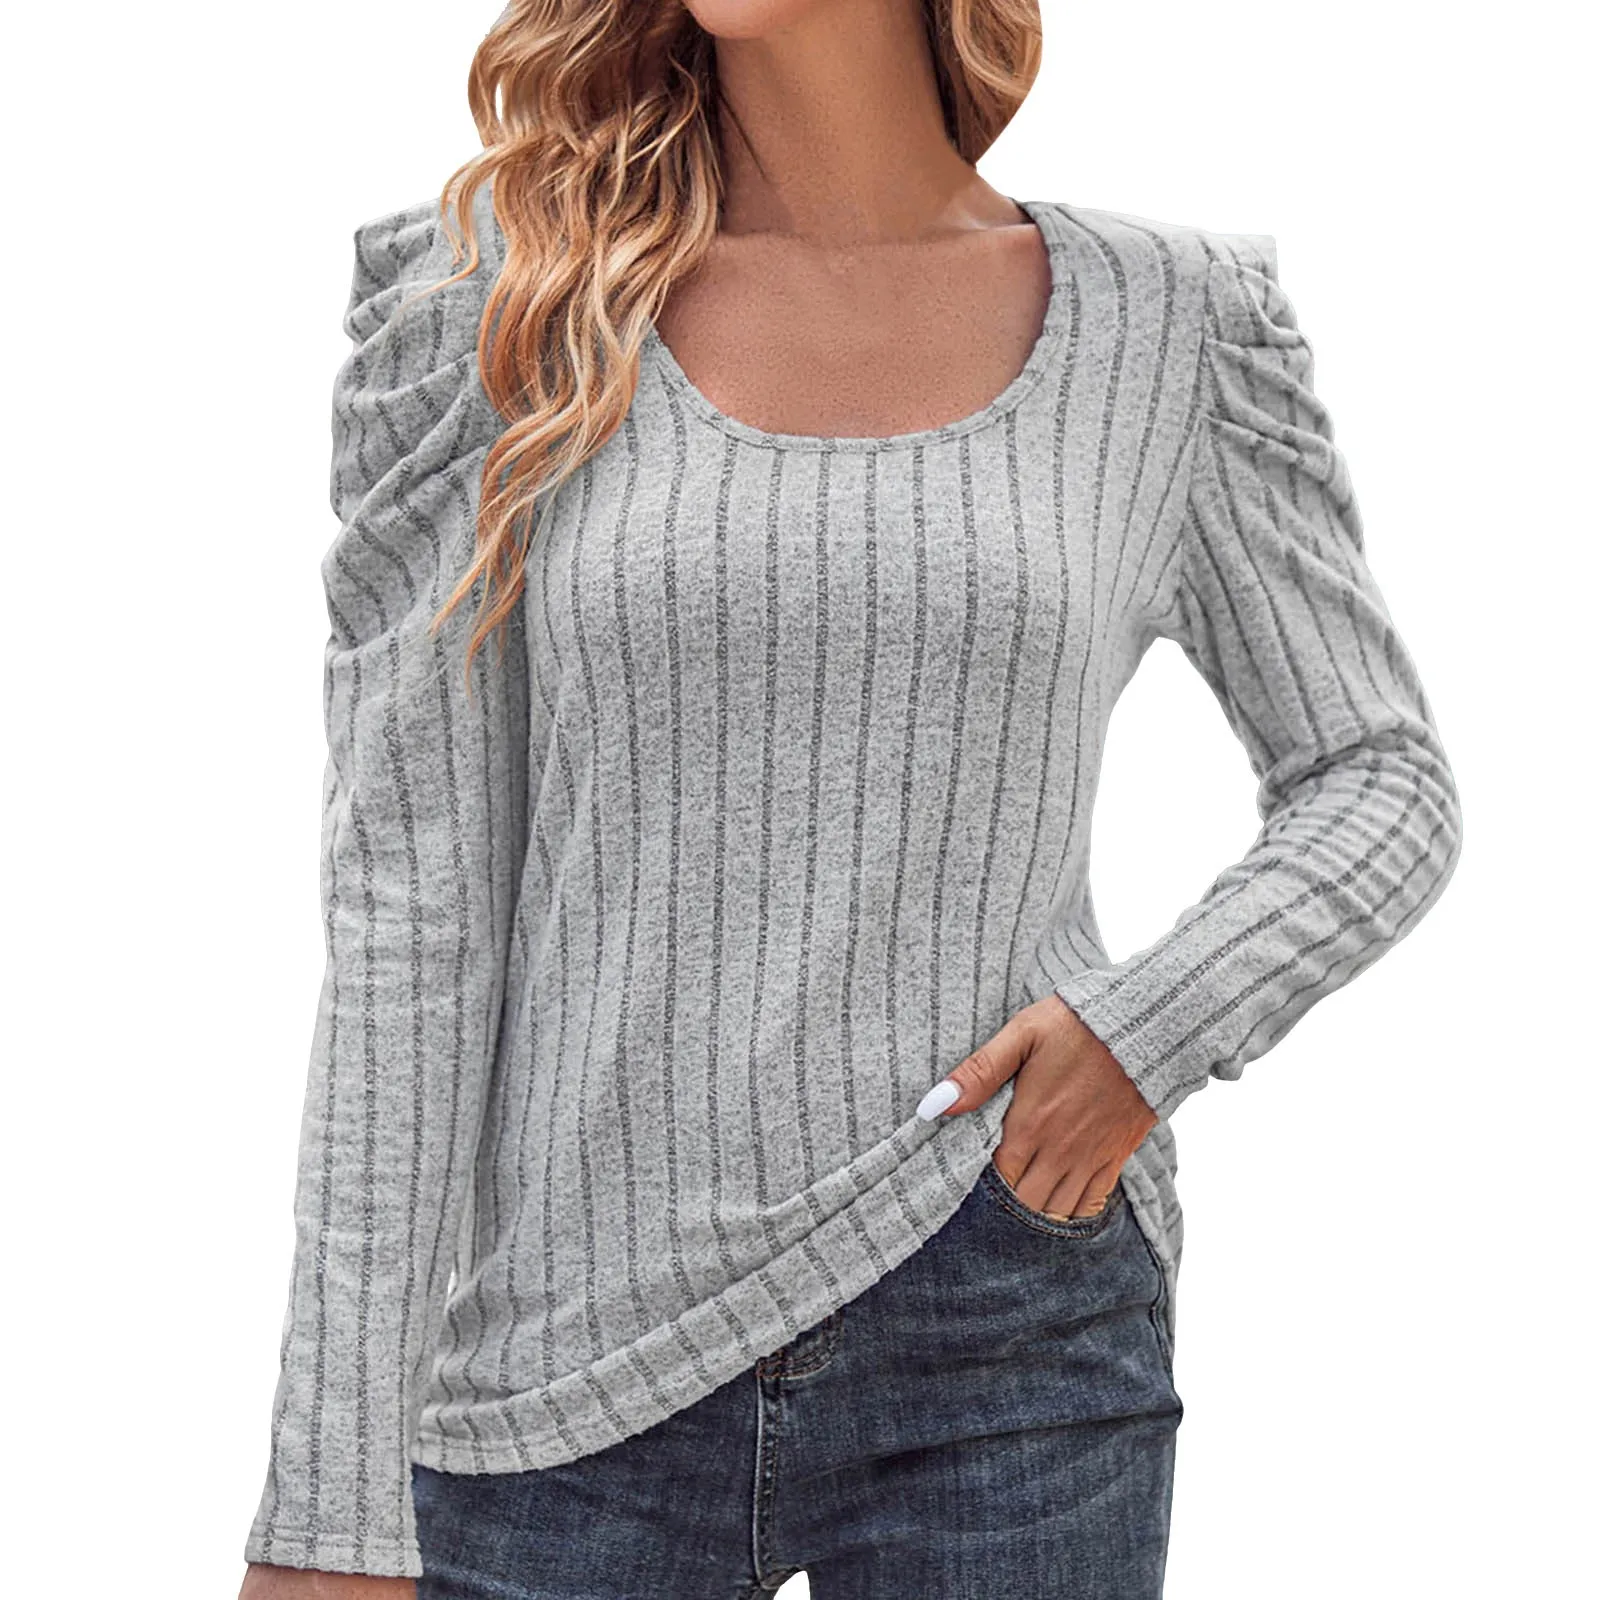 

Women's Casual Square Neck Slim Fitting Long Sleeved Versatile Knitted Top Layering Tee Tunic Womens Tops Casual